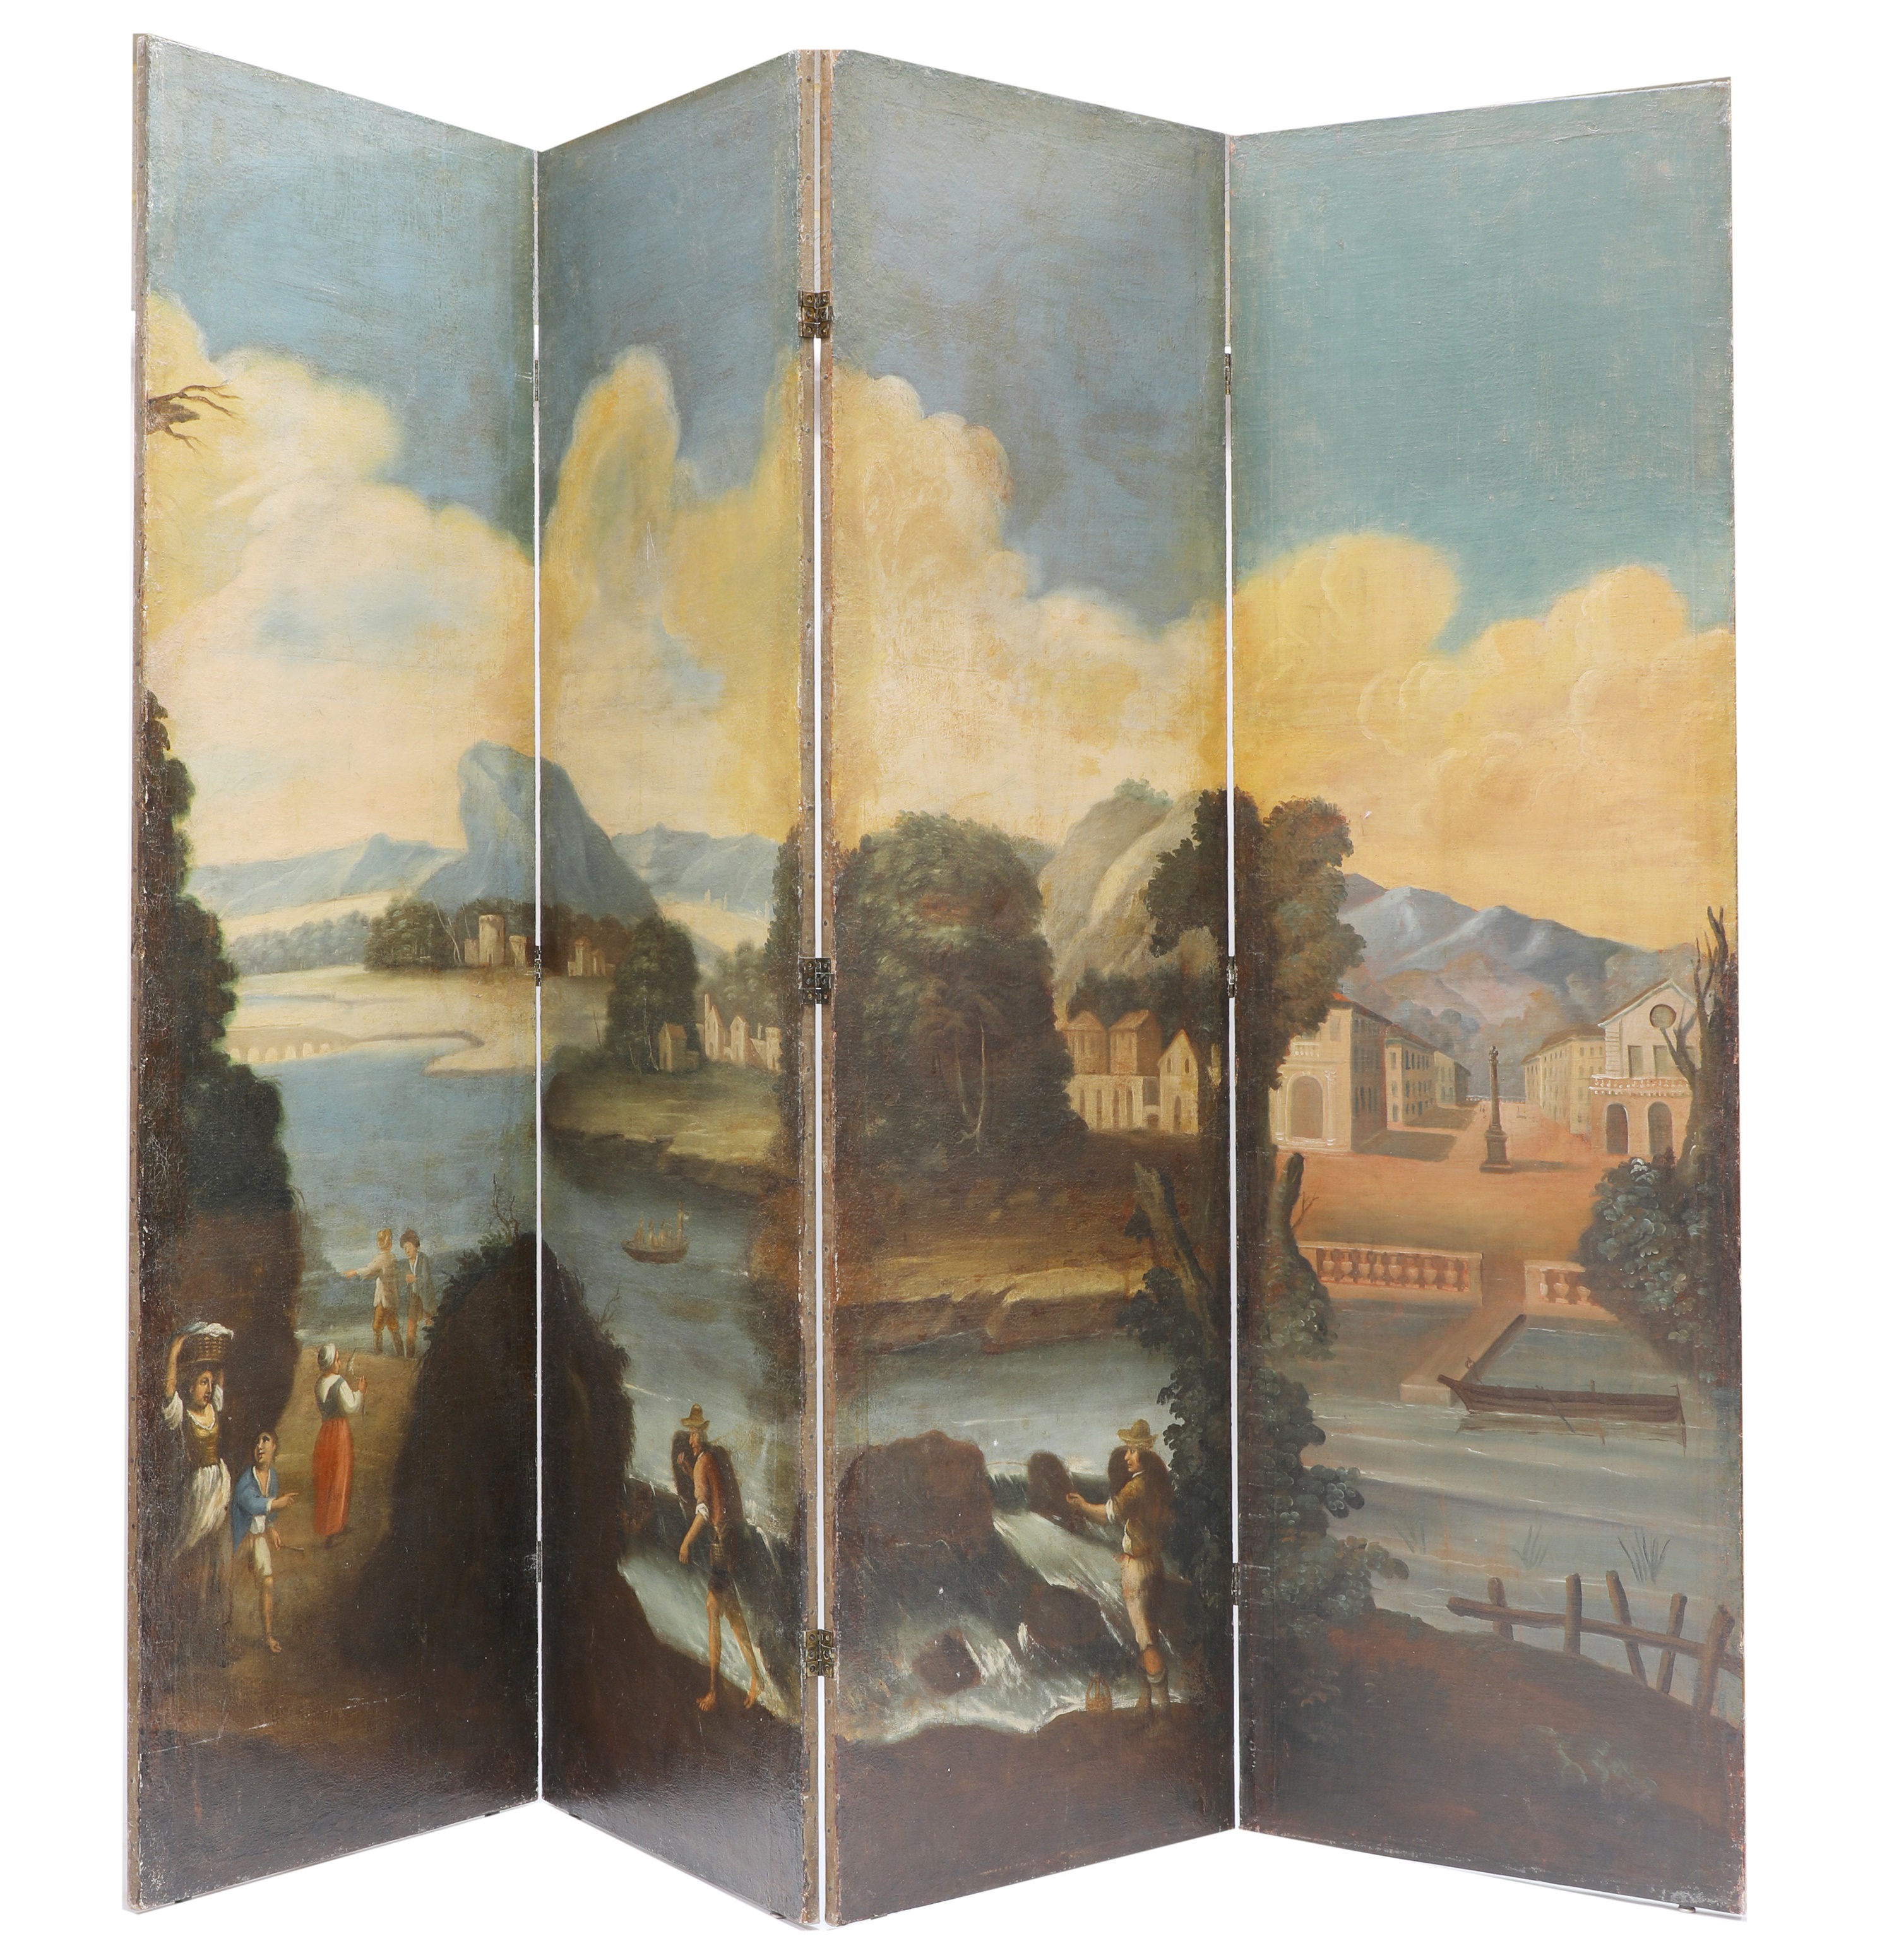 A large painted four-fold screen